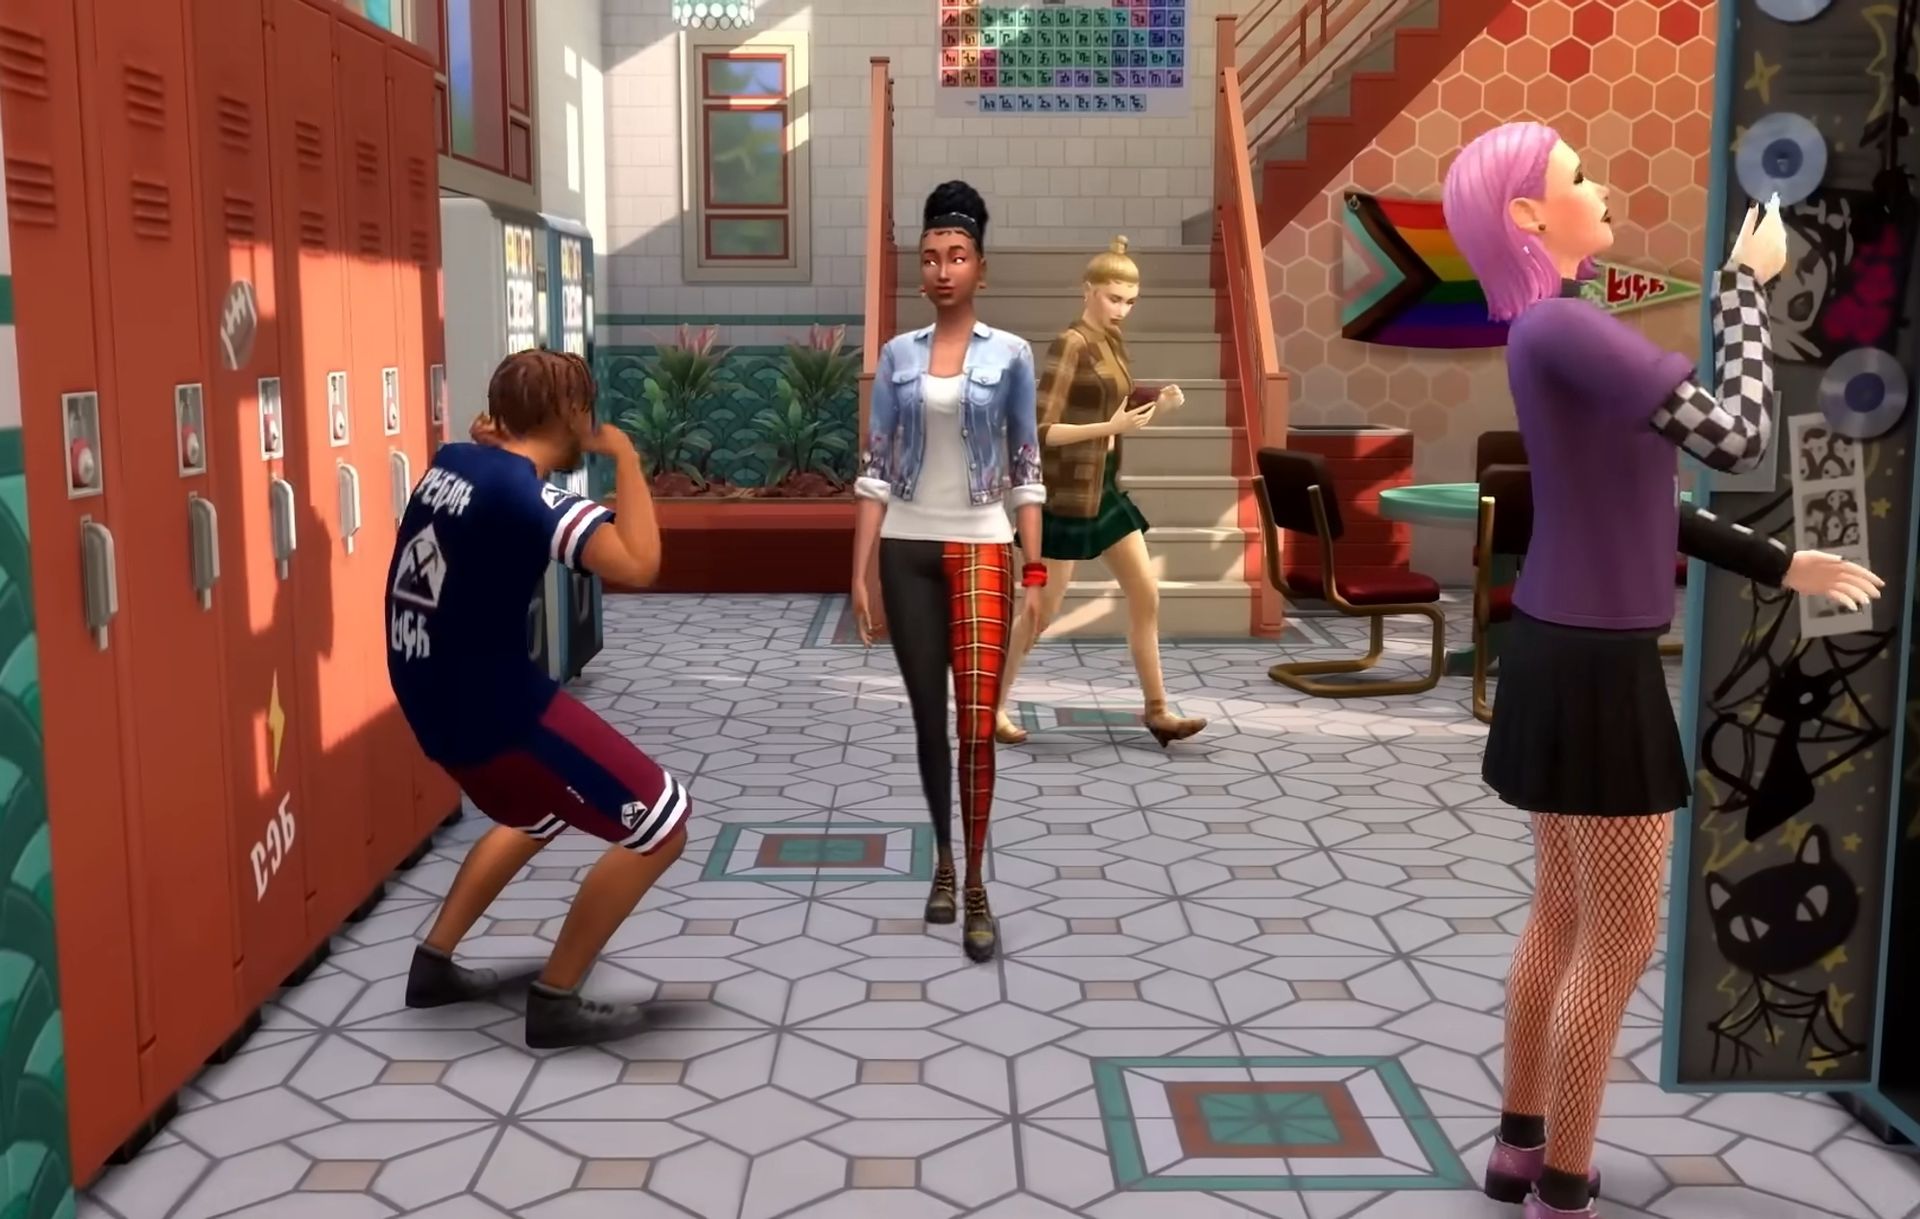 In this article, we are going to be covering everything you need to know about the new Sims 4 High School Years DLC.